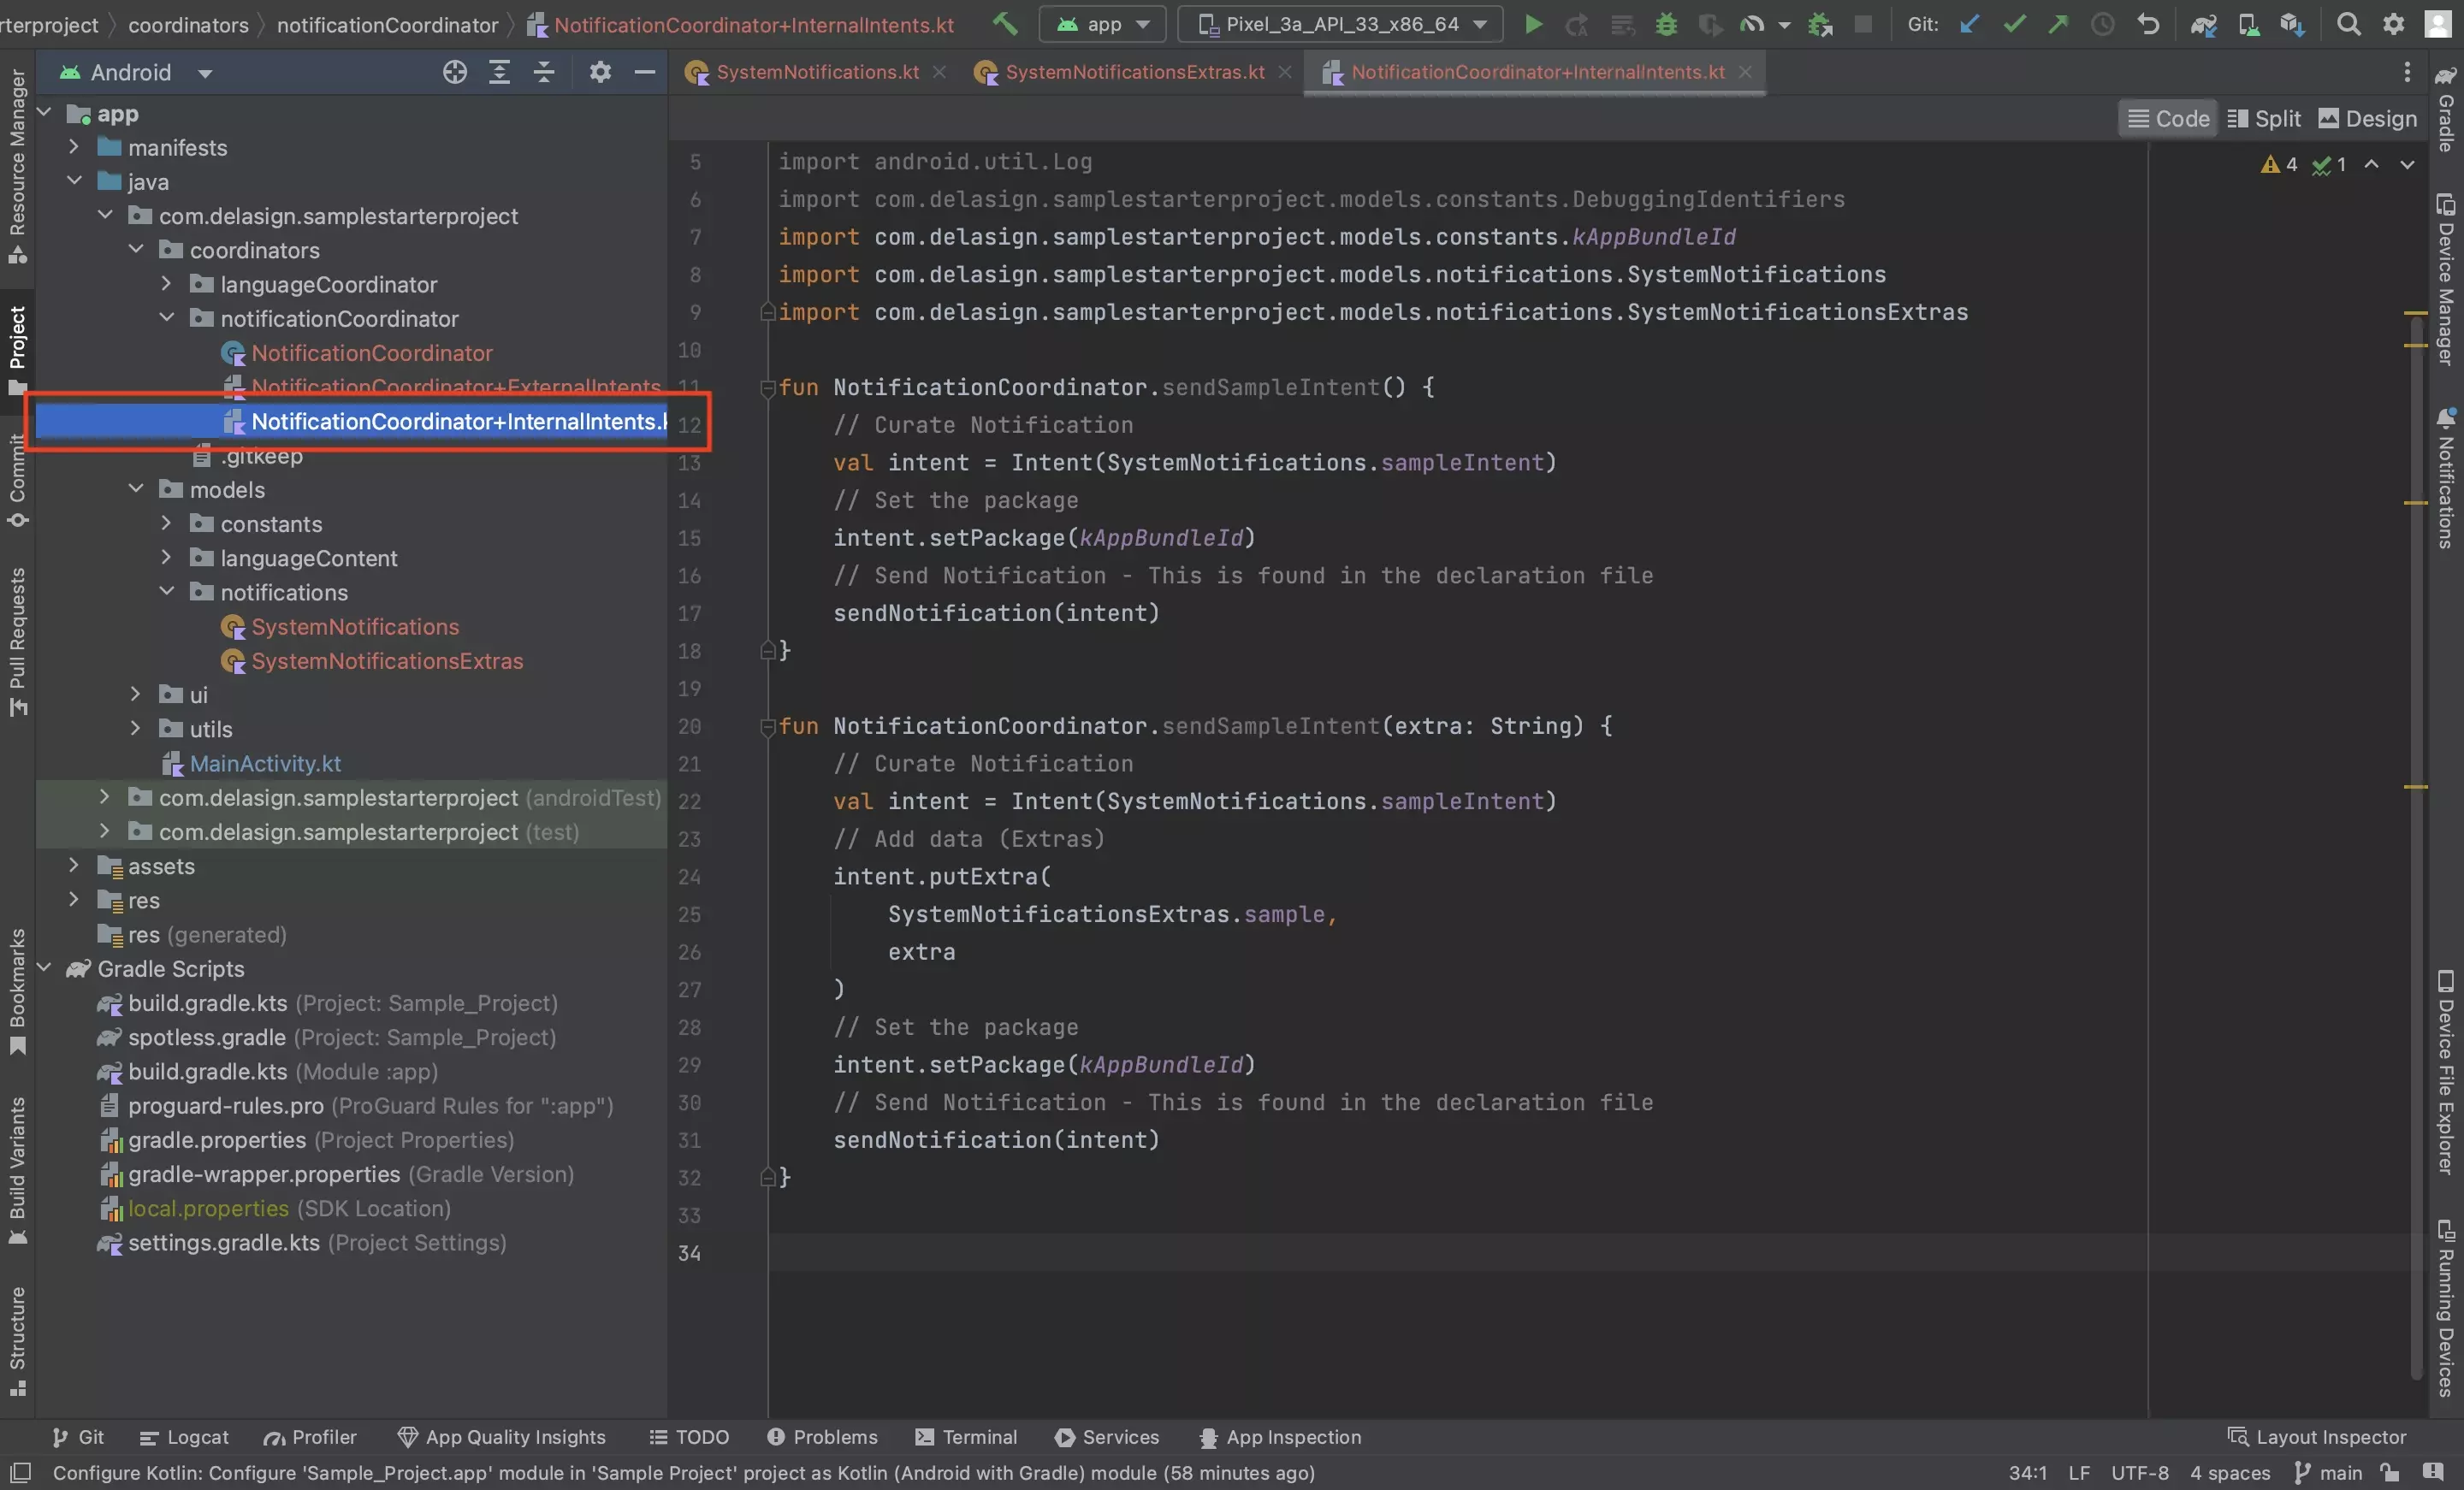 A screenshot of Android Studio showing how to send an internal intent and one with extras. Code available below.